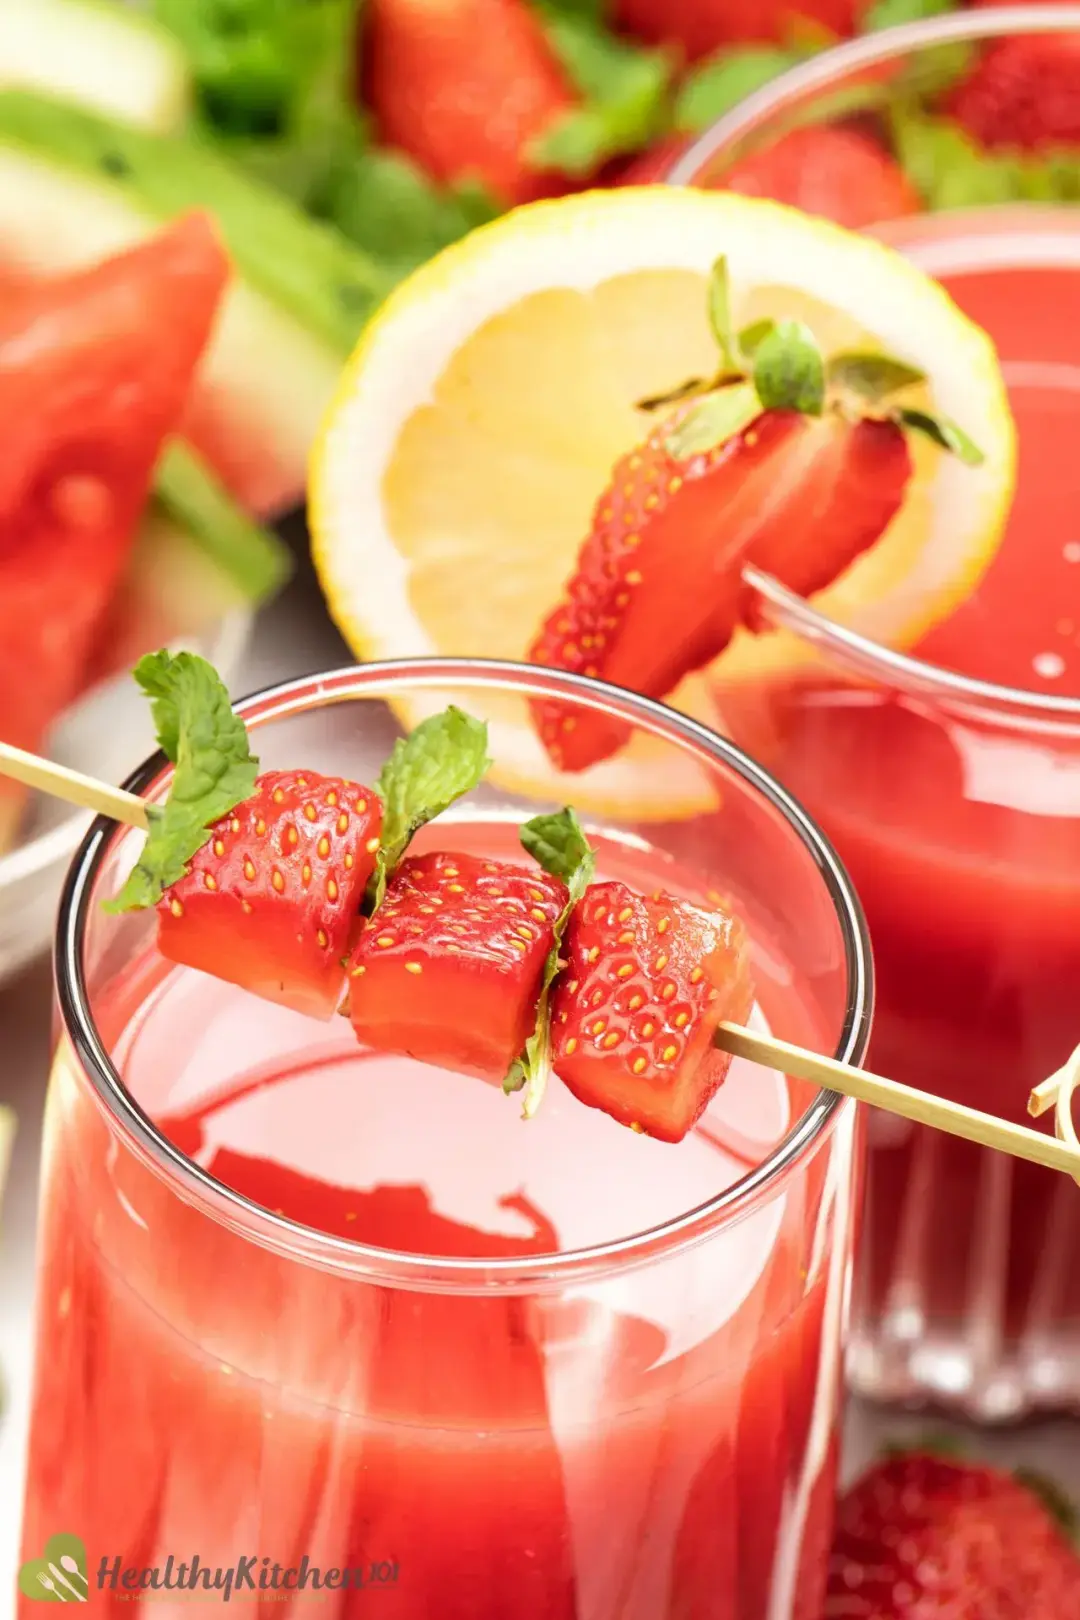 A close-up shot of two glasses of juice decorated with strawberries and a slice of lemon